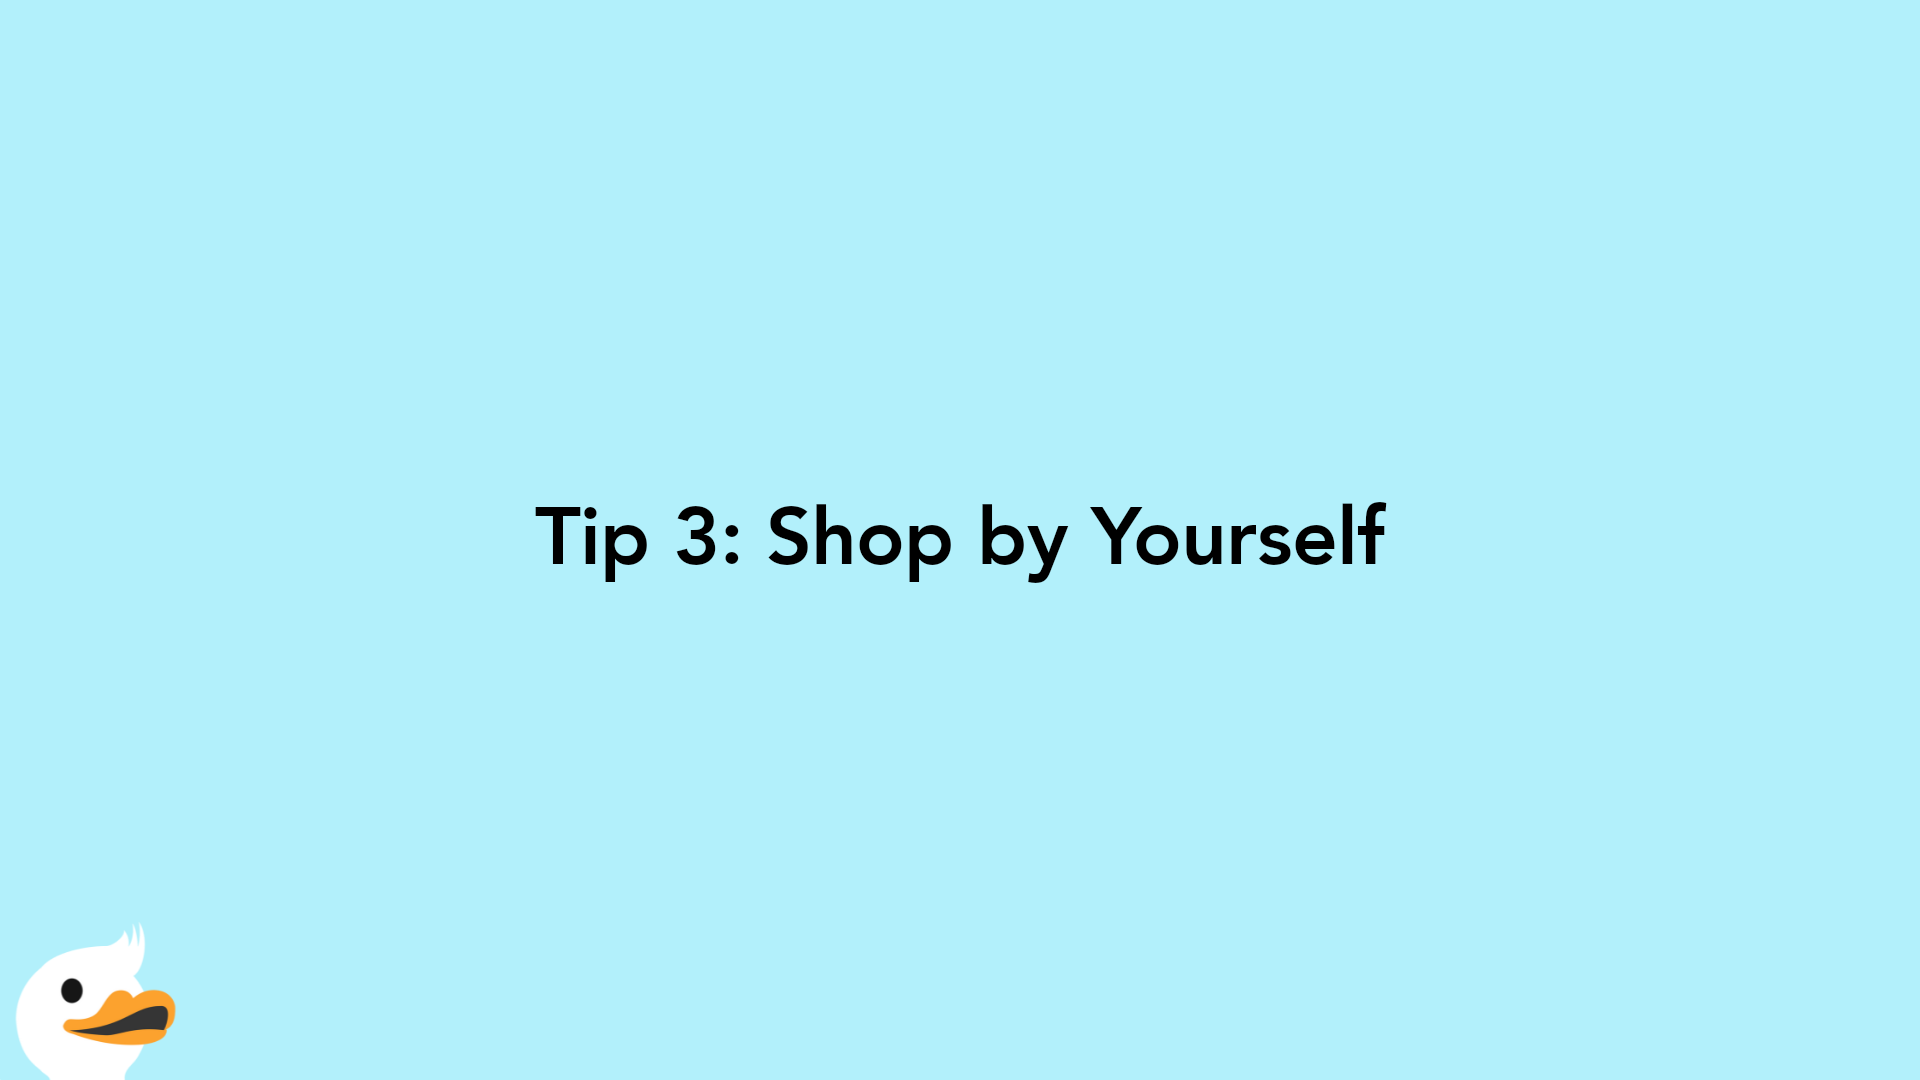 Tip 3: Shop by Yourself